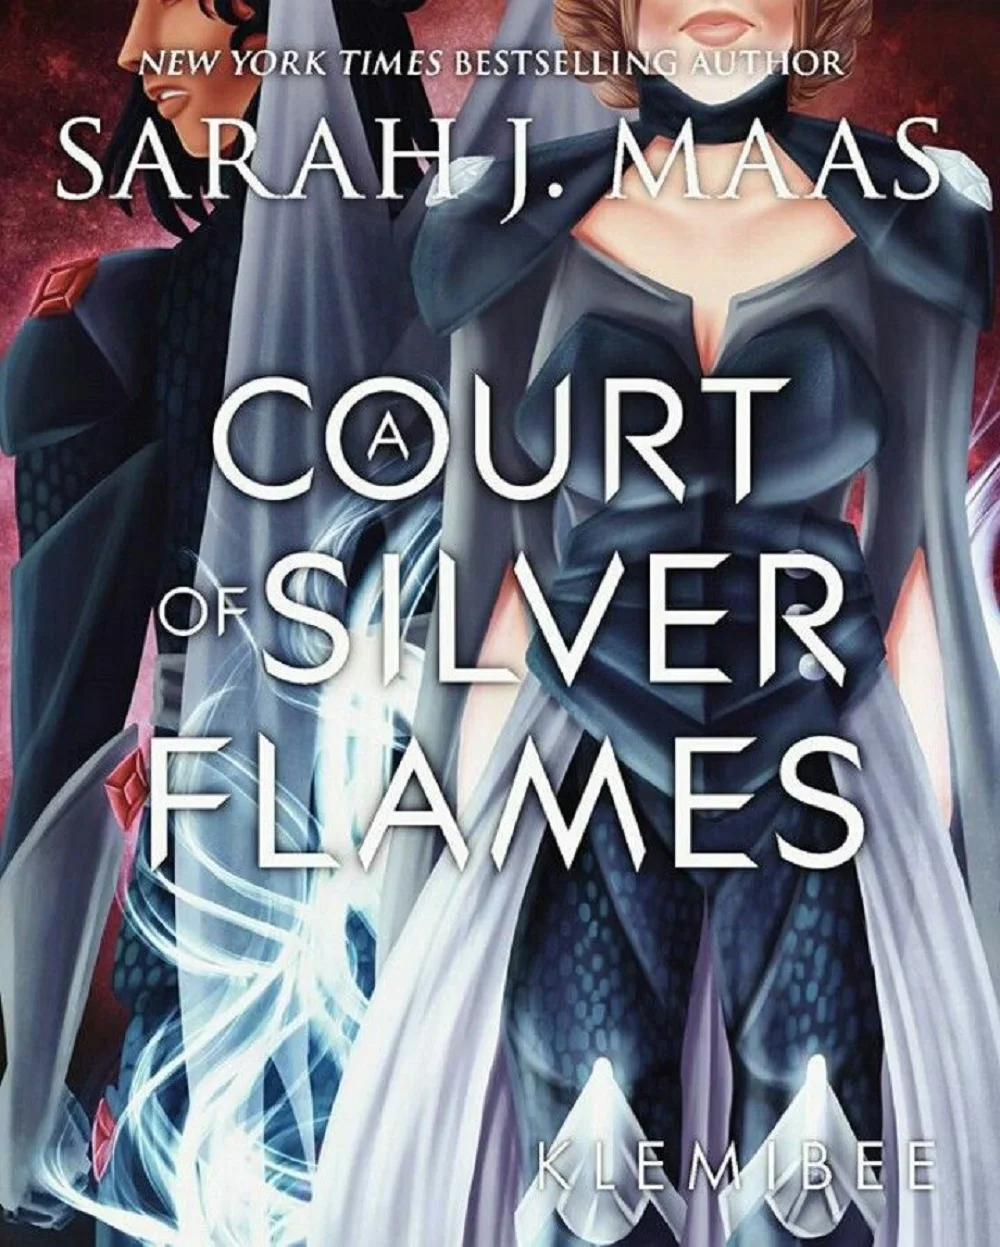 Описание: Купить A Court of Silver Flames (A Thorns and Roses) E-BOOK. 